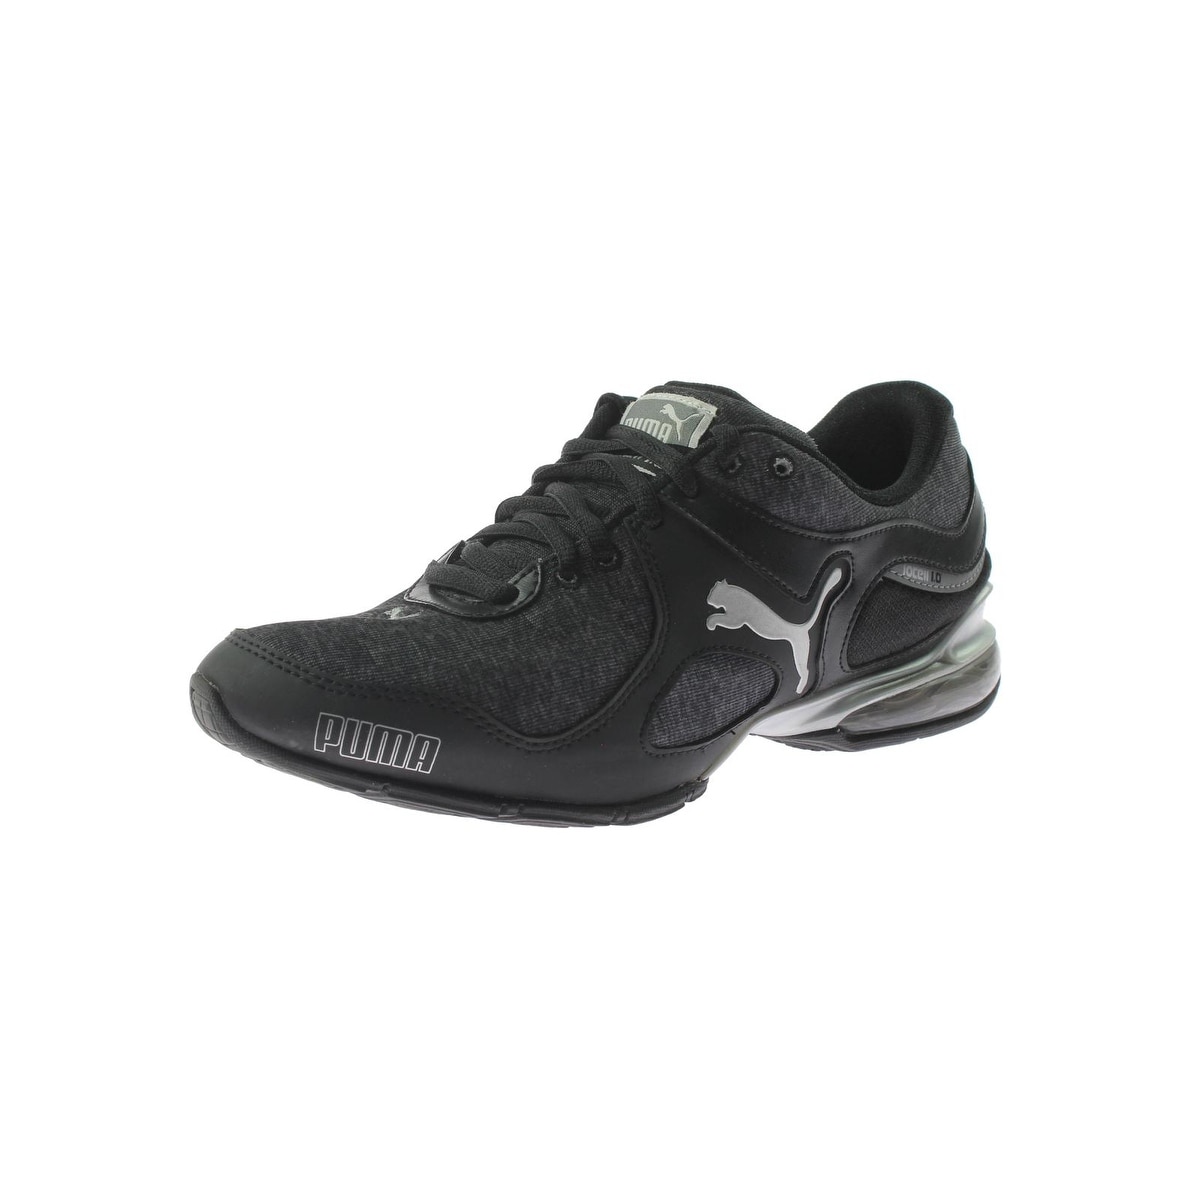 puma cell riaze womens athletic shoes